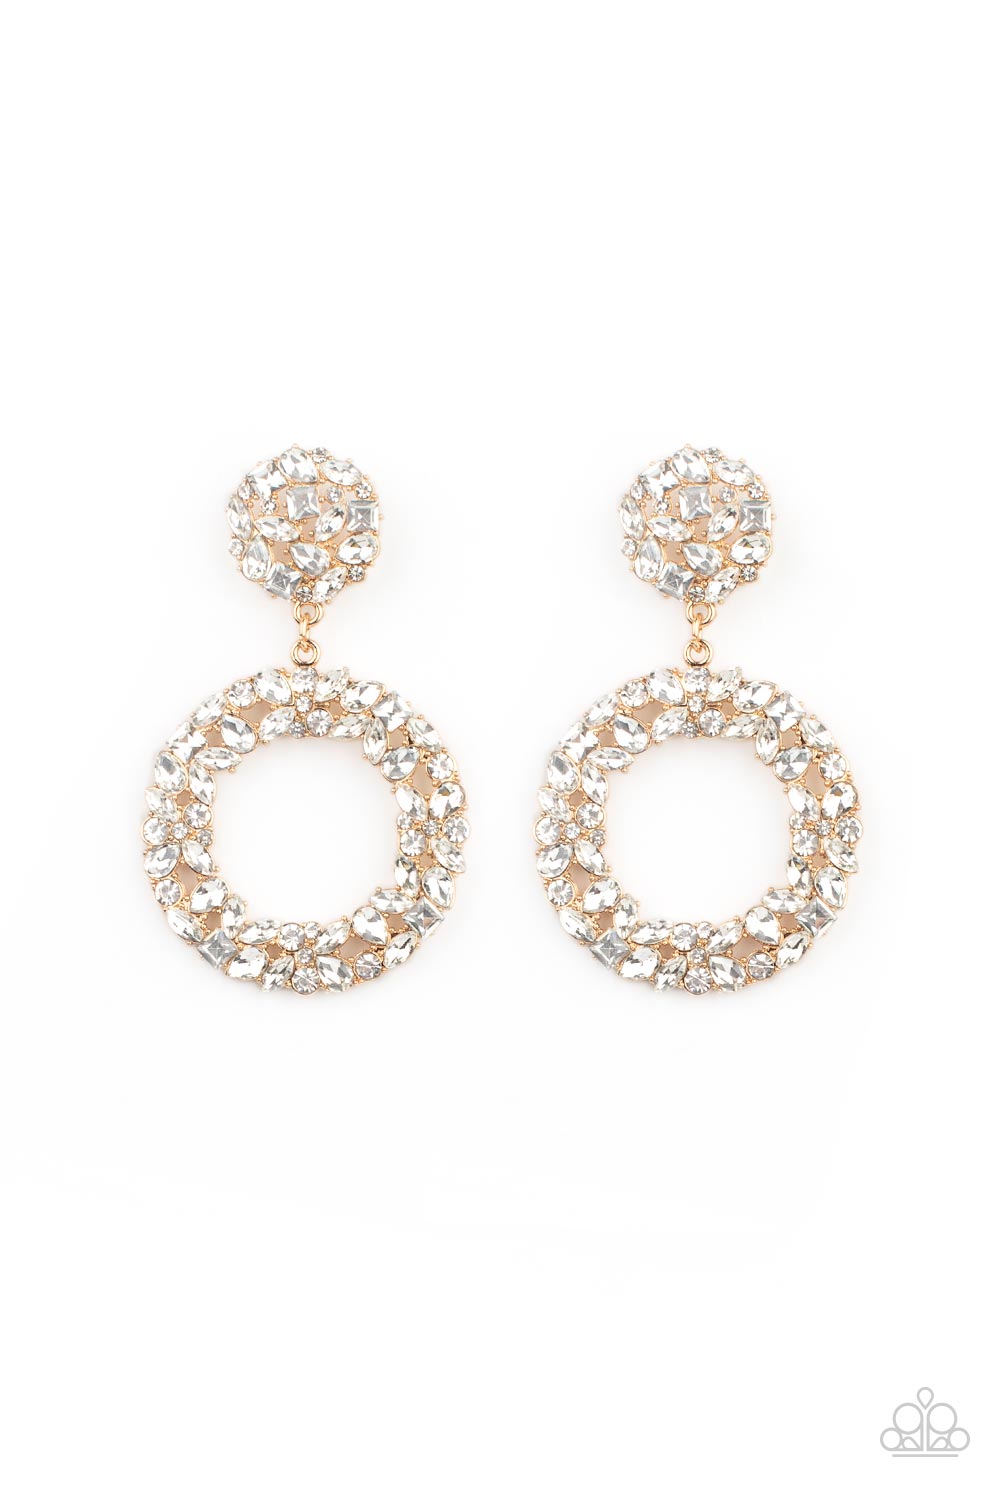 Party Ensemble Gold Earring - Paparazzi Accessories  A sparkly wreath of marquise, square, teardrop, and classic white rhinestones delicately swings from the bottom of a matching round golden frame, creating a dramatically dazzling statement piece. Earring attaches to a standard post fitting.  Sold as one pair of post earrings.